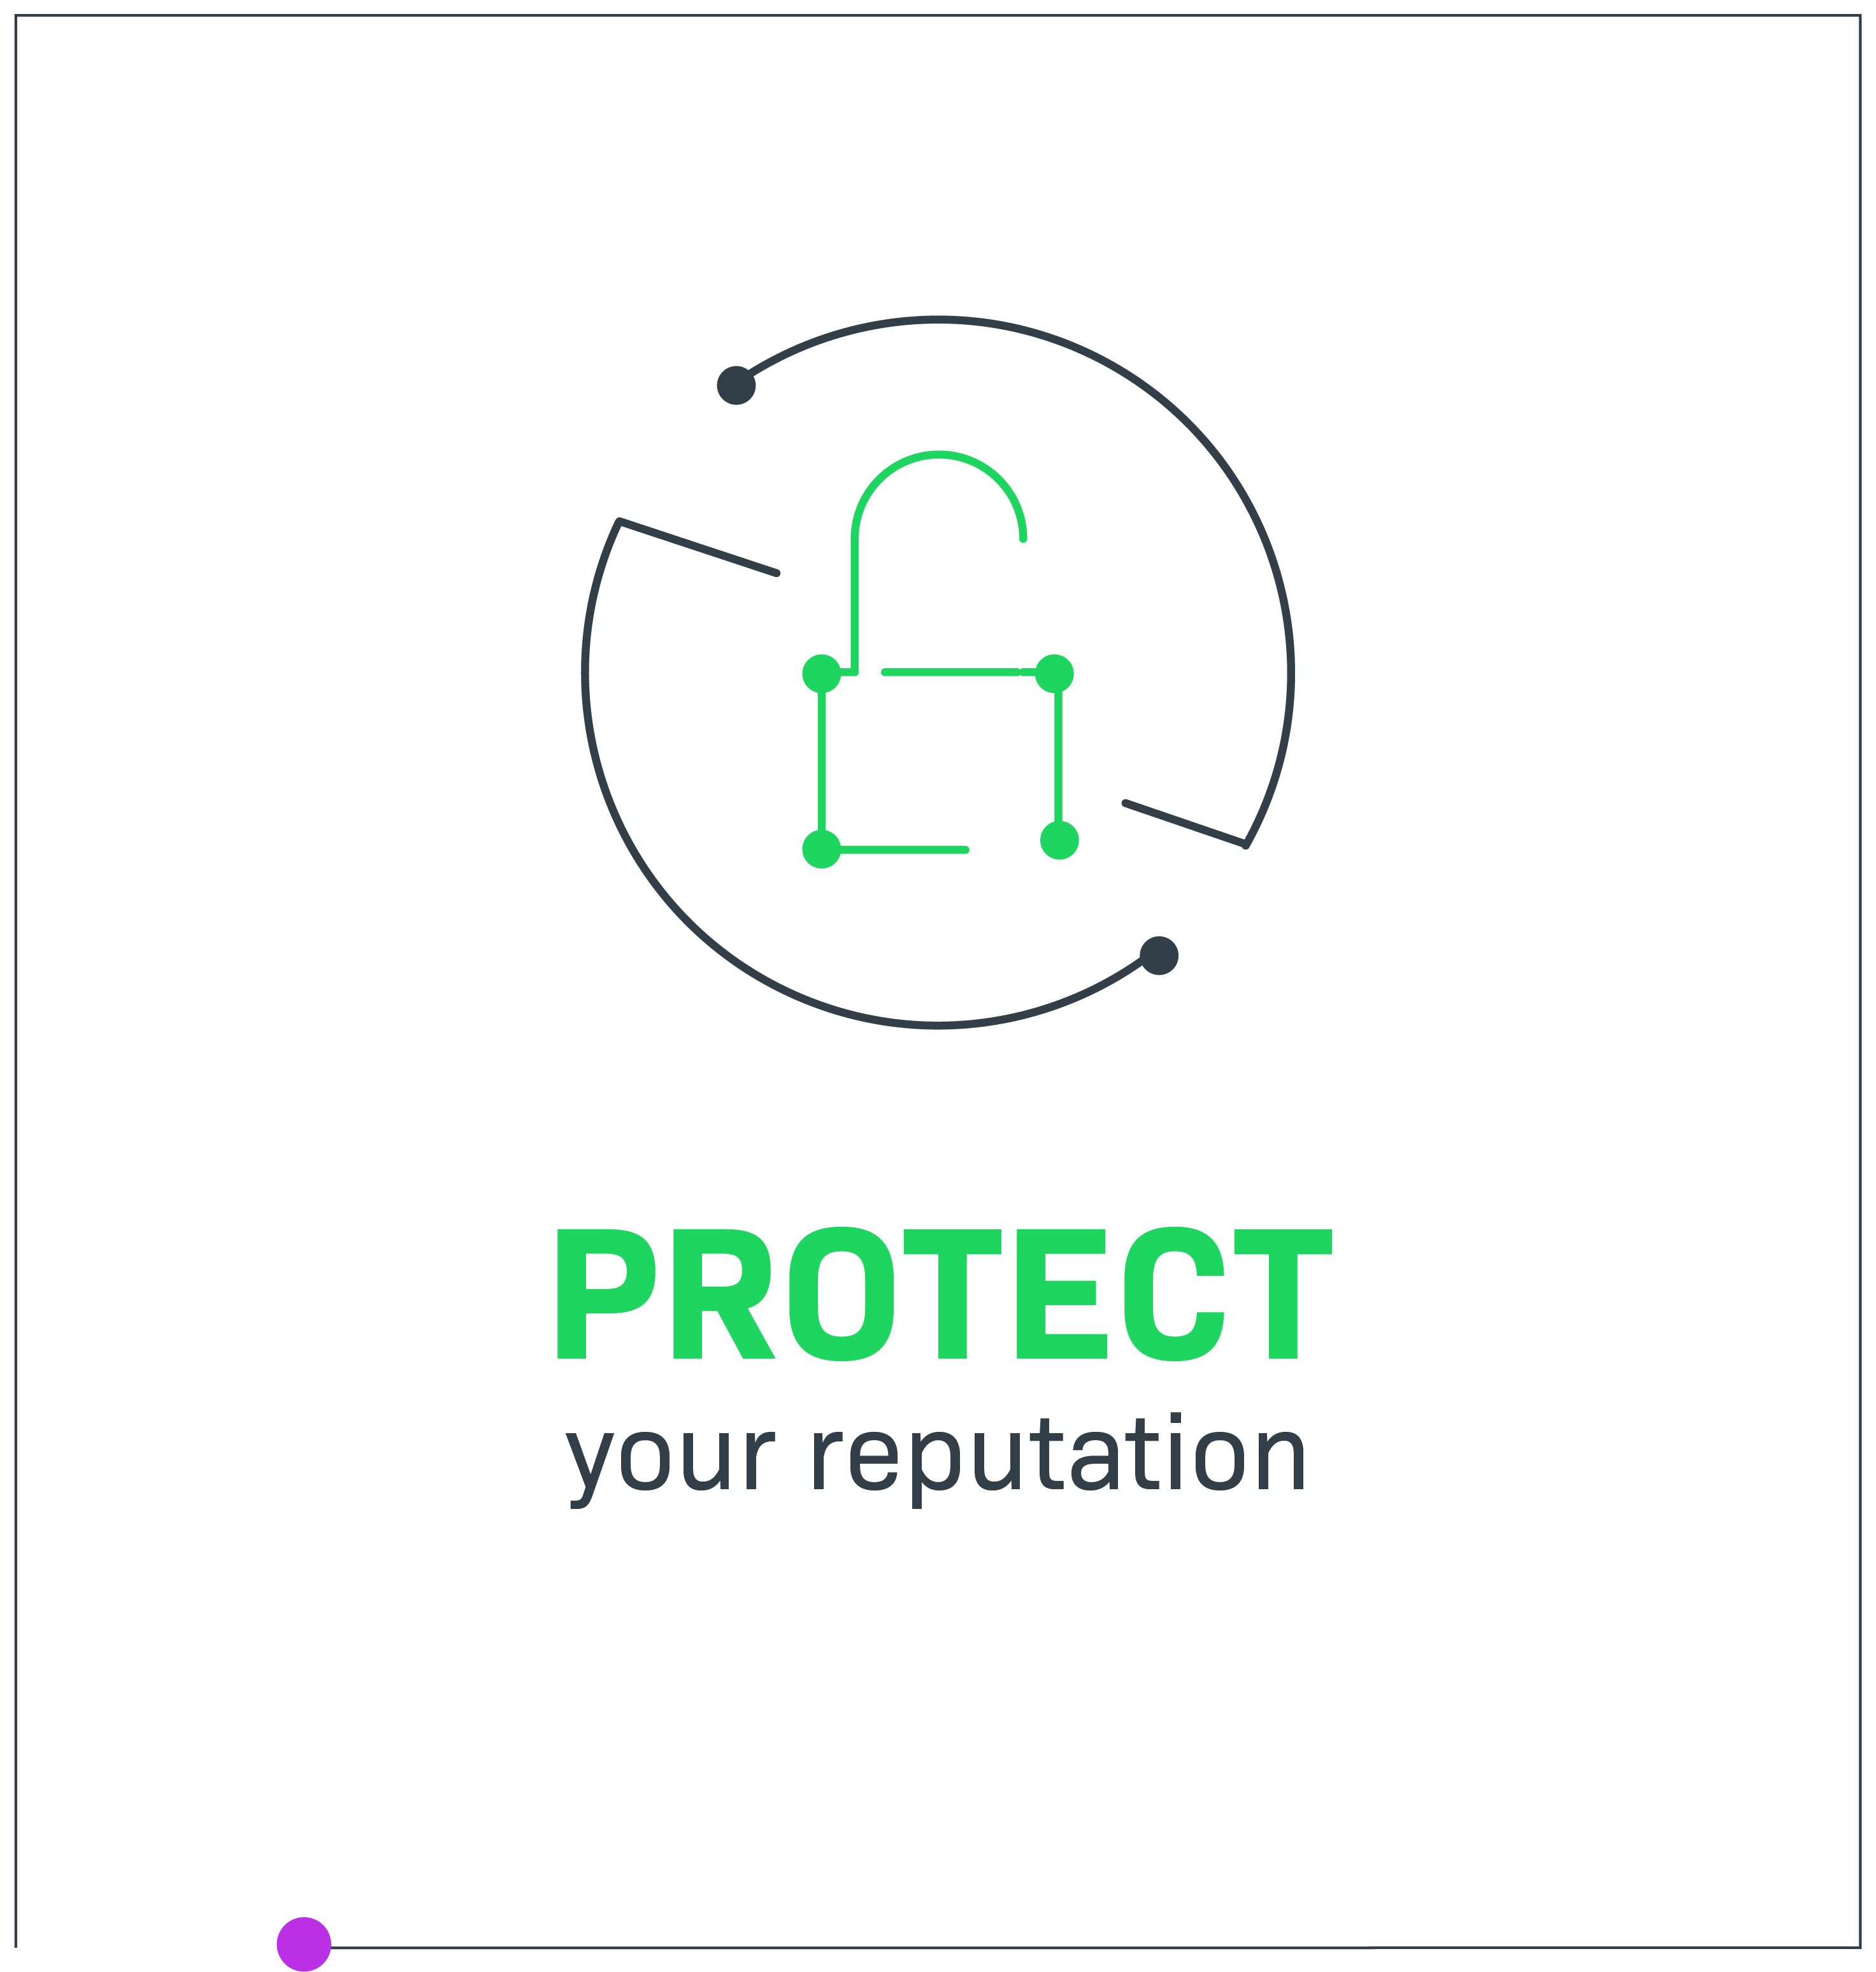 Protect your reputation